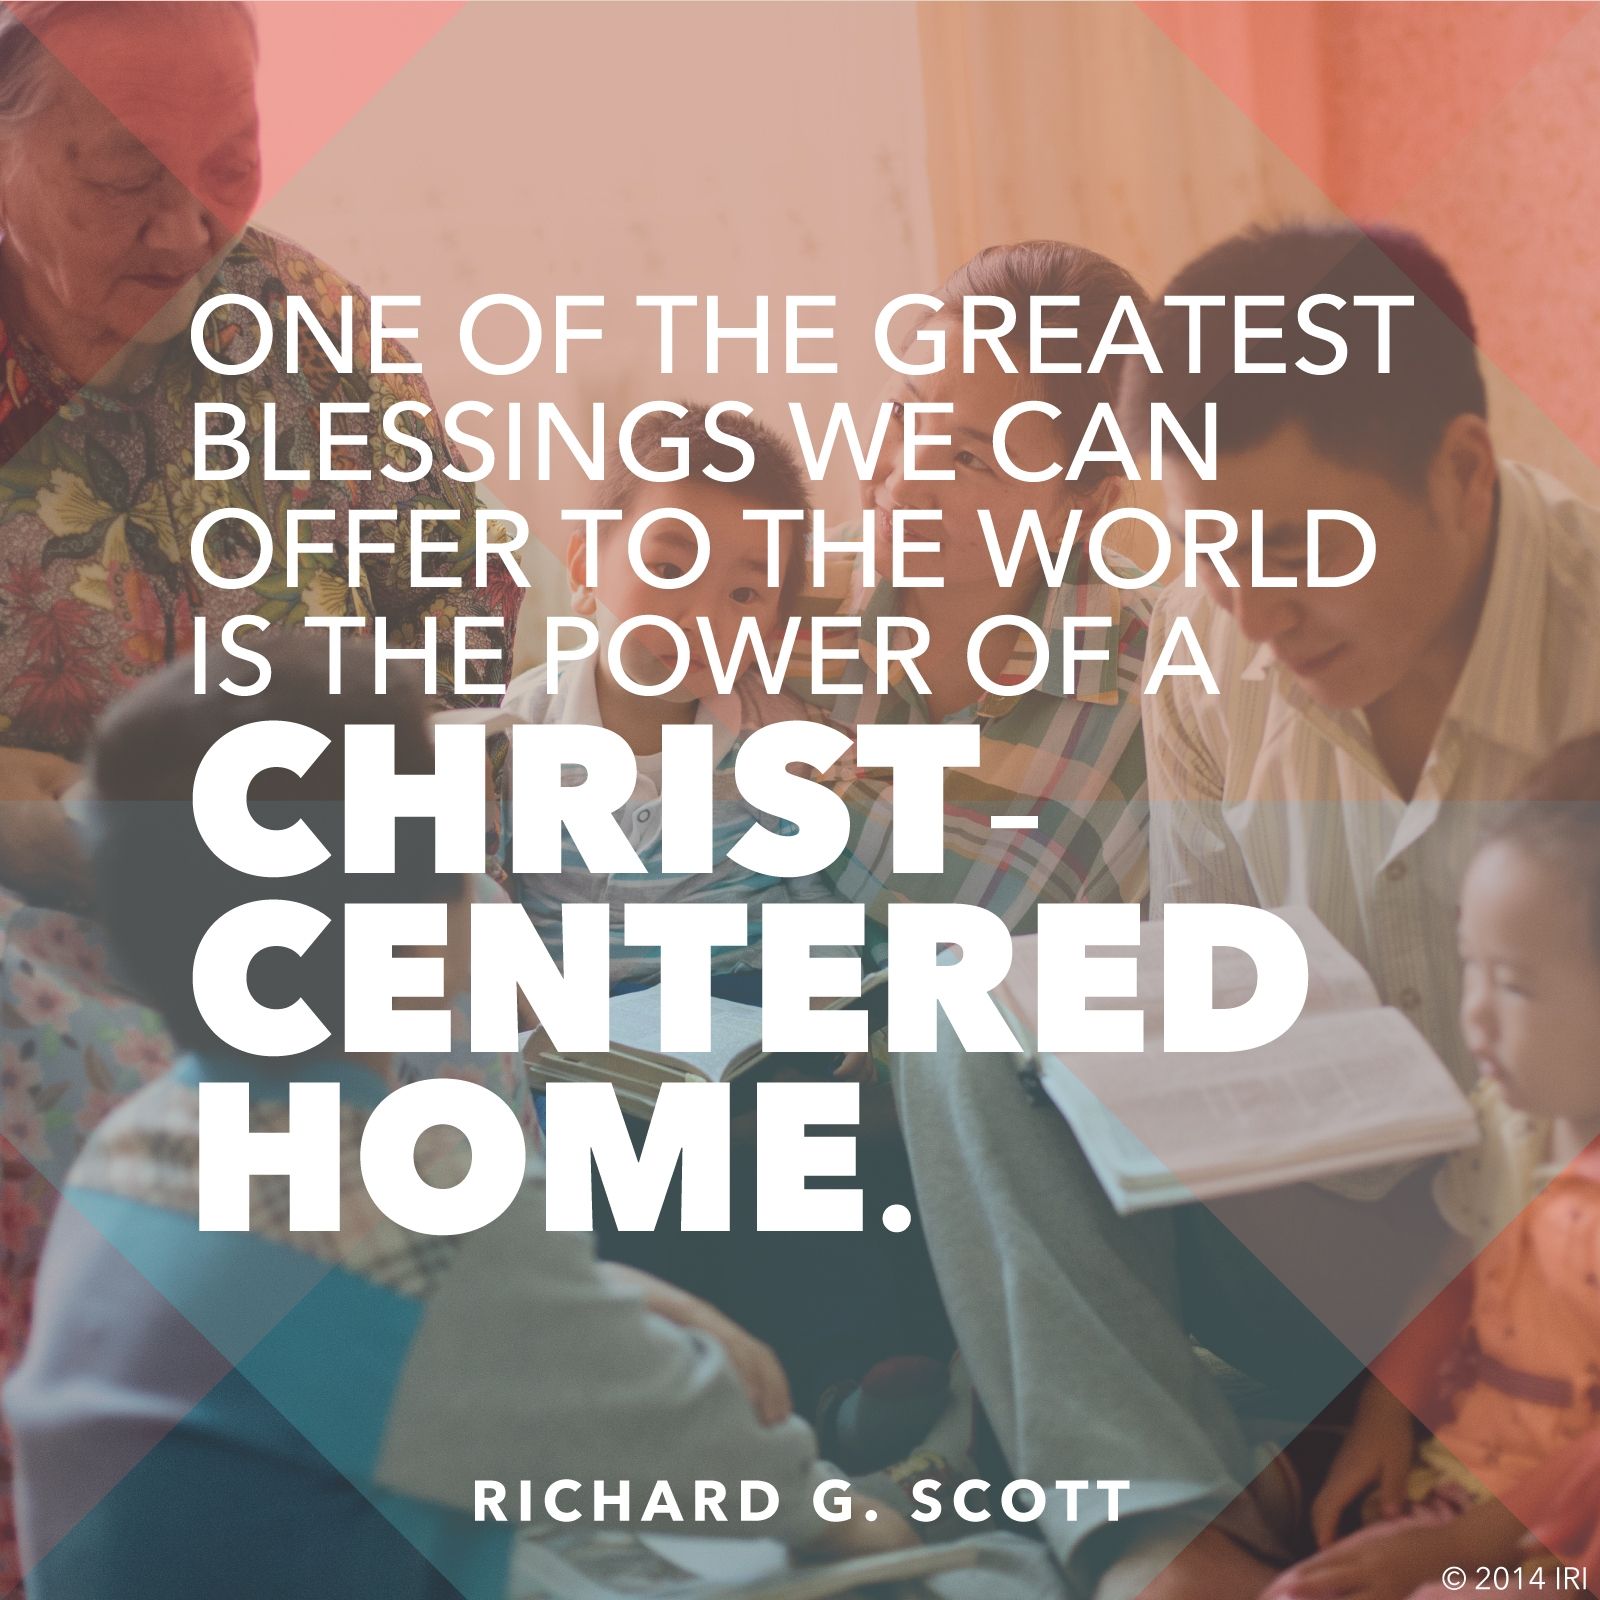 “One of the greatest blessings we can offer to the world is the power of a Christ-centered home.”—Elder Richard G. Scott, “For Peace at Home” © undefined ipCode 1.